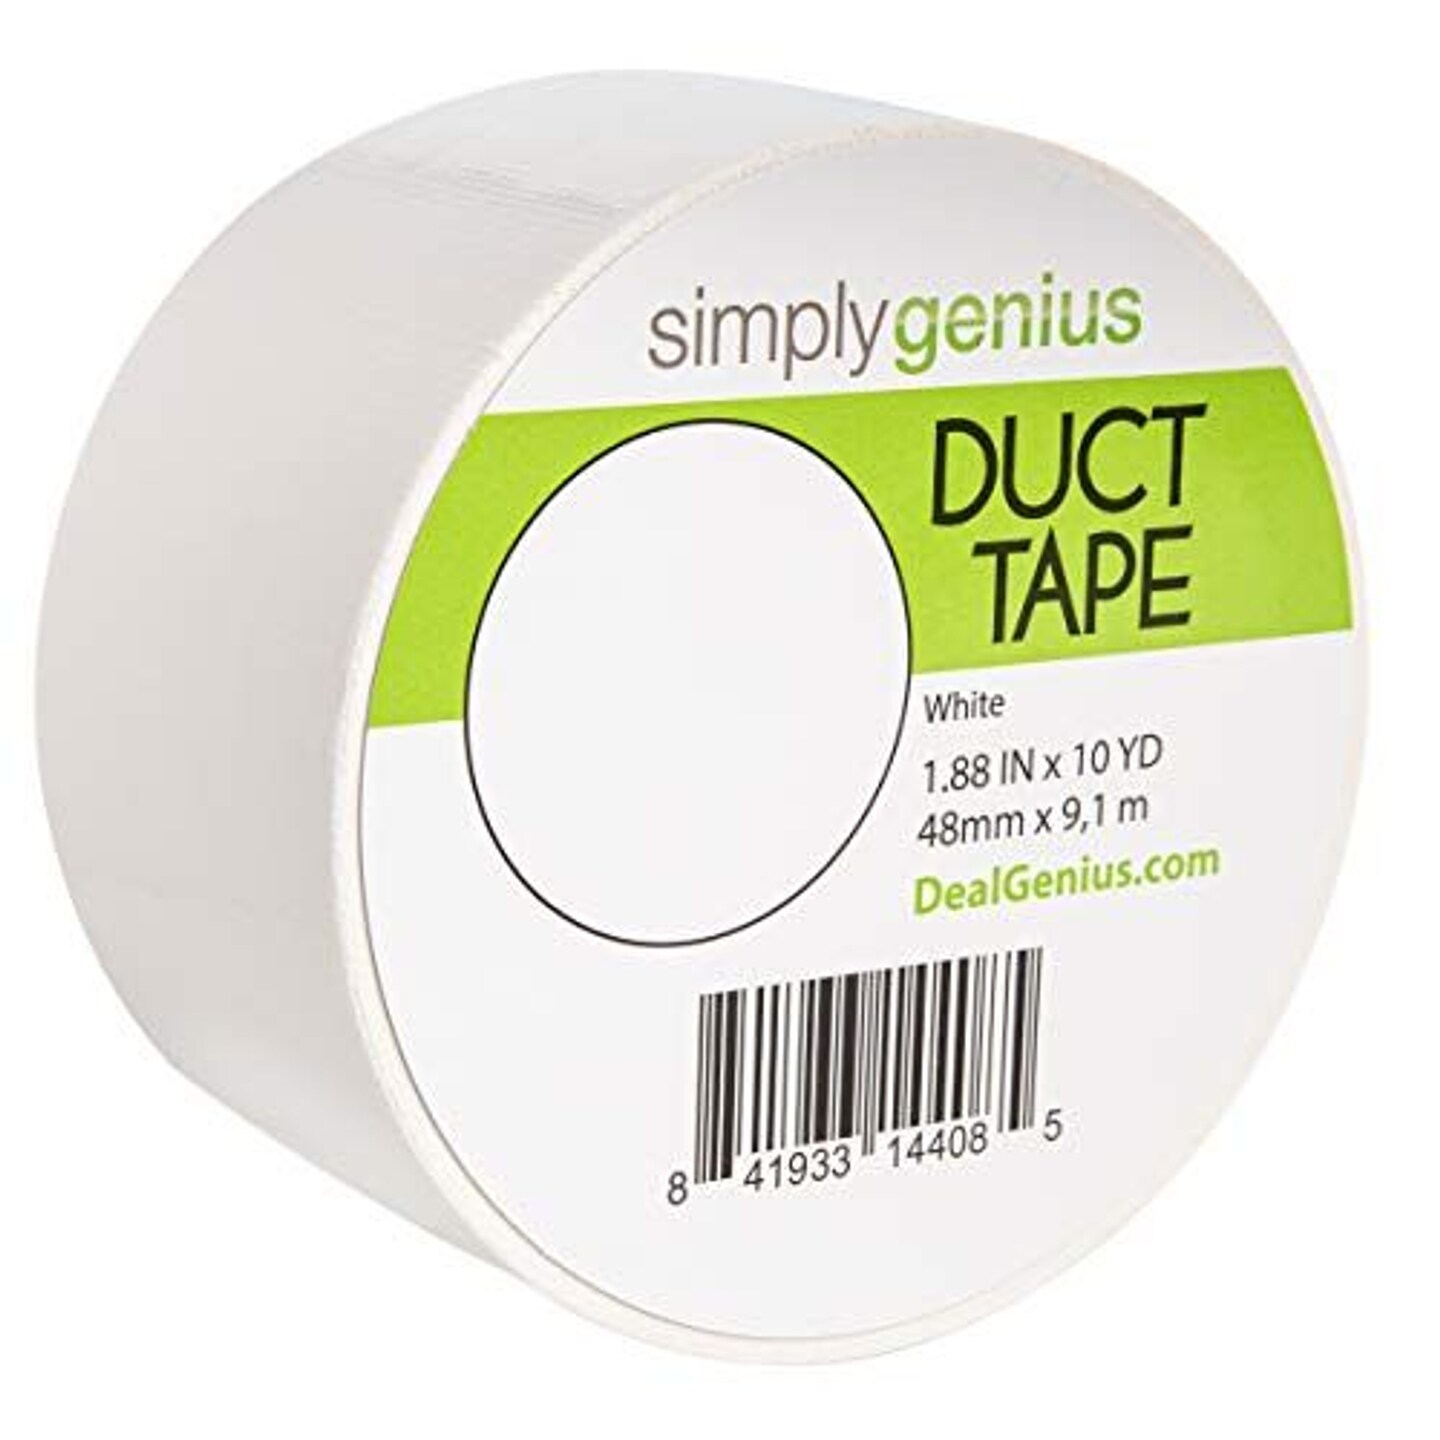 Simply Genius Art &#x26; Craft Duct Tape Heavy Duty - Craft Supplies for Kids &#x26; Adults - Colored Duct Tape - 1.8 in x 10 yards - Colorful Tape for DIY, Craft &#x26; Home Improvement (White, Single roll)